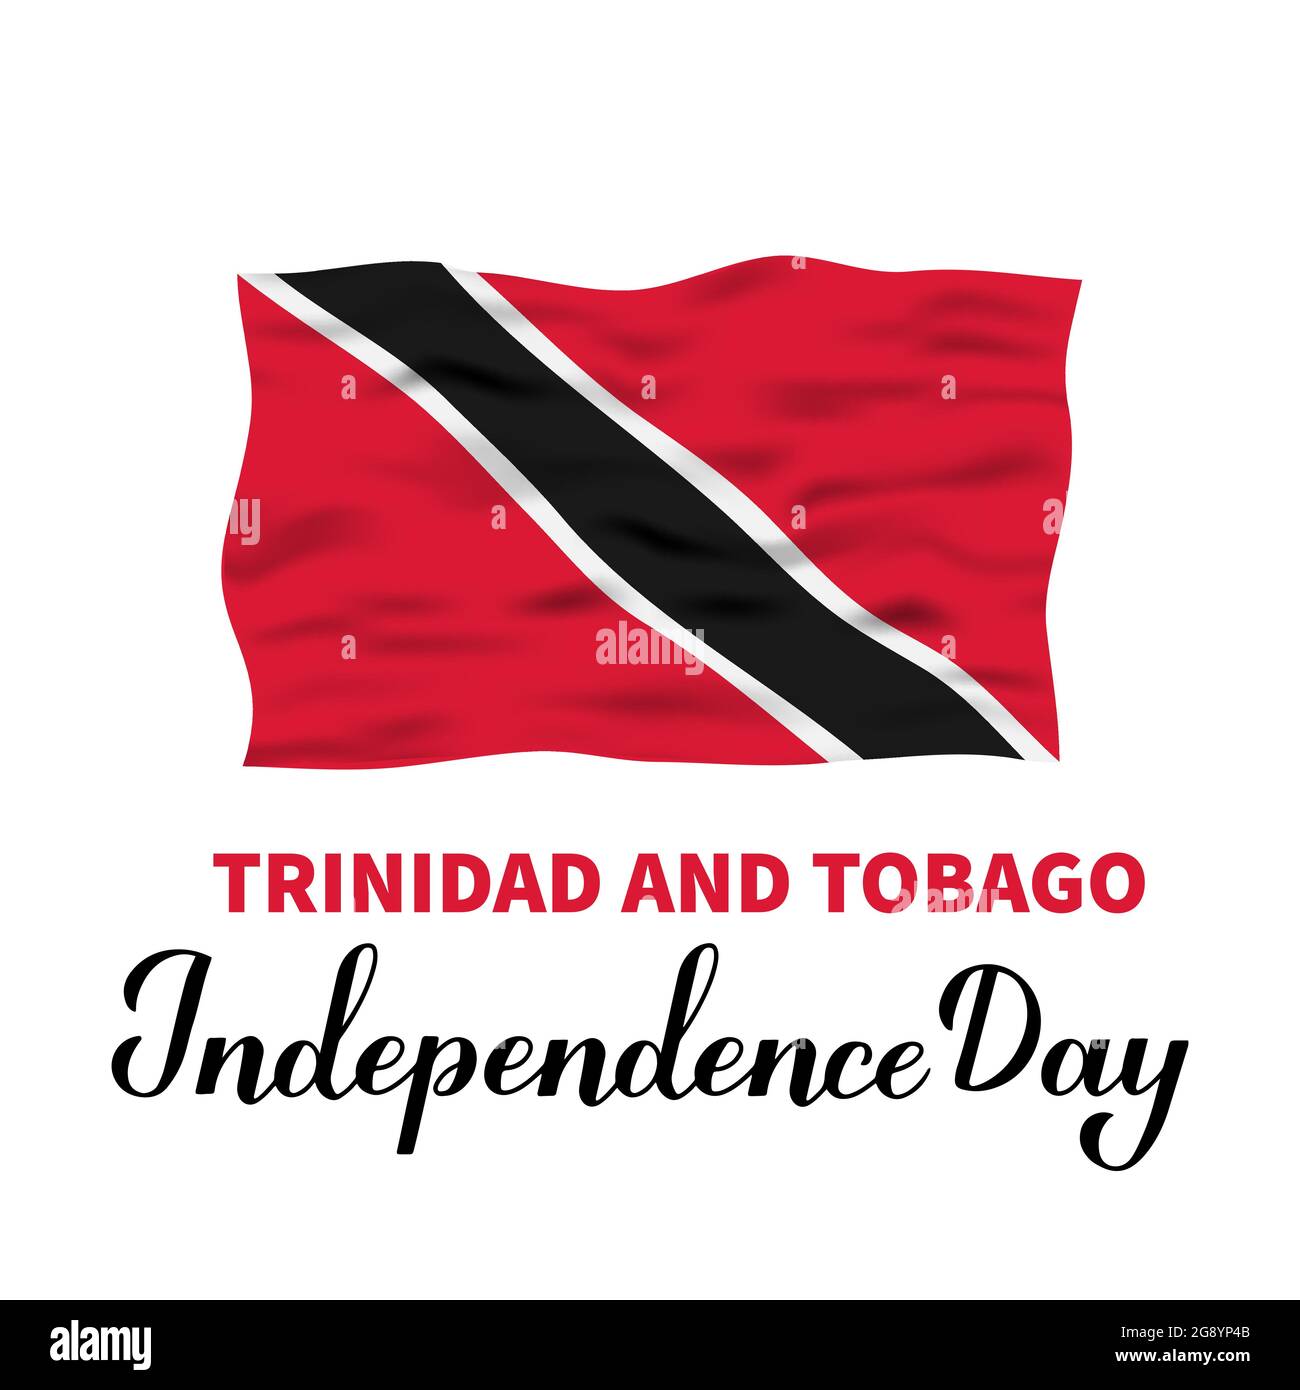 Trinidad And Tobago Independence Day Lettering With Flag Isolated On